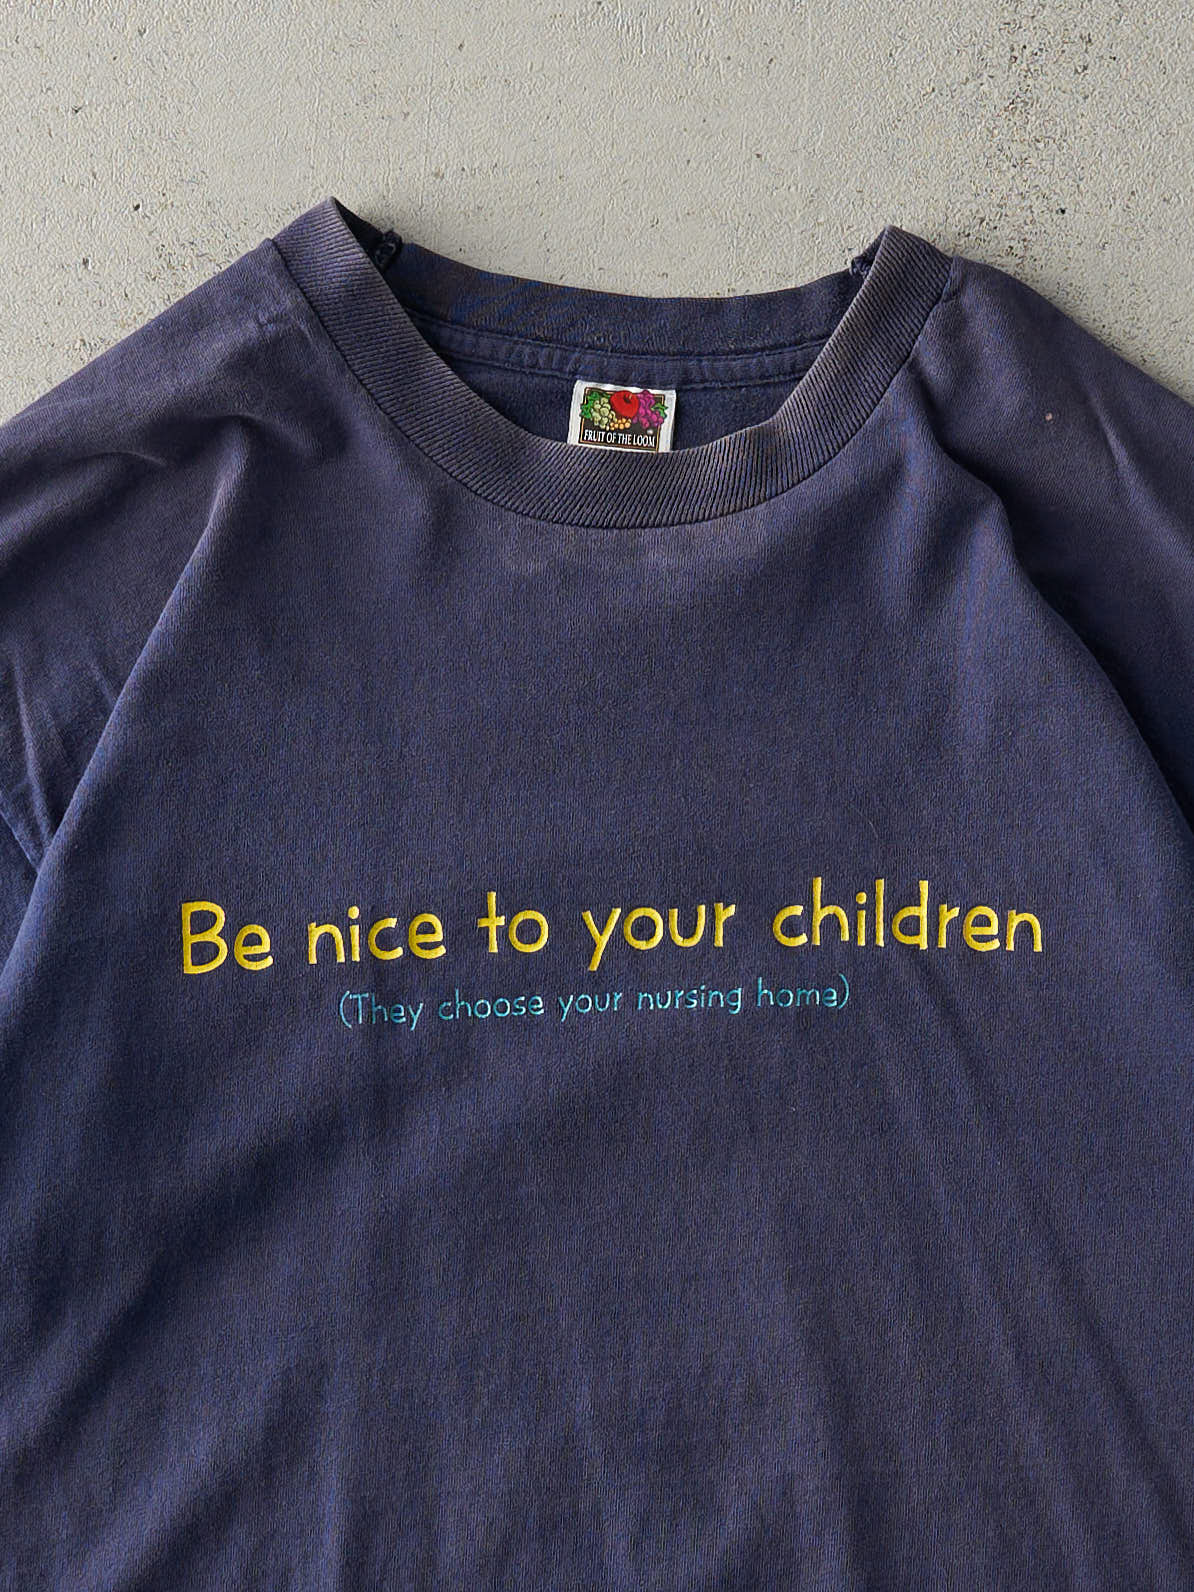 Vintage 90s Navy Blue "Be Nice To Your Children" Tee (L/XL)